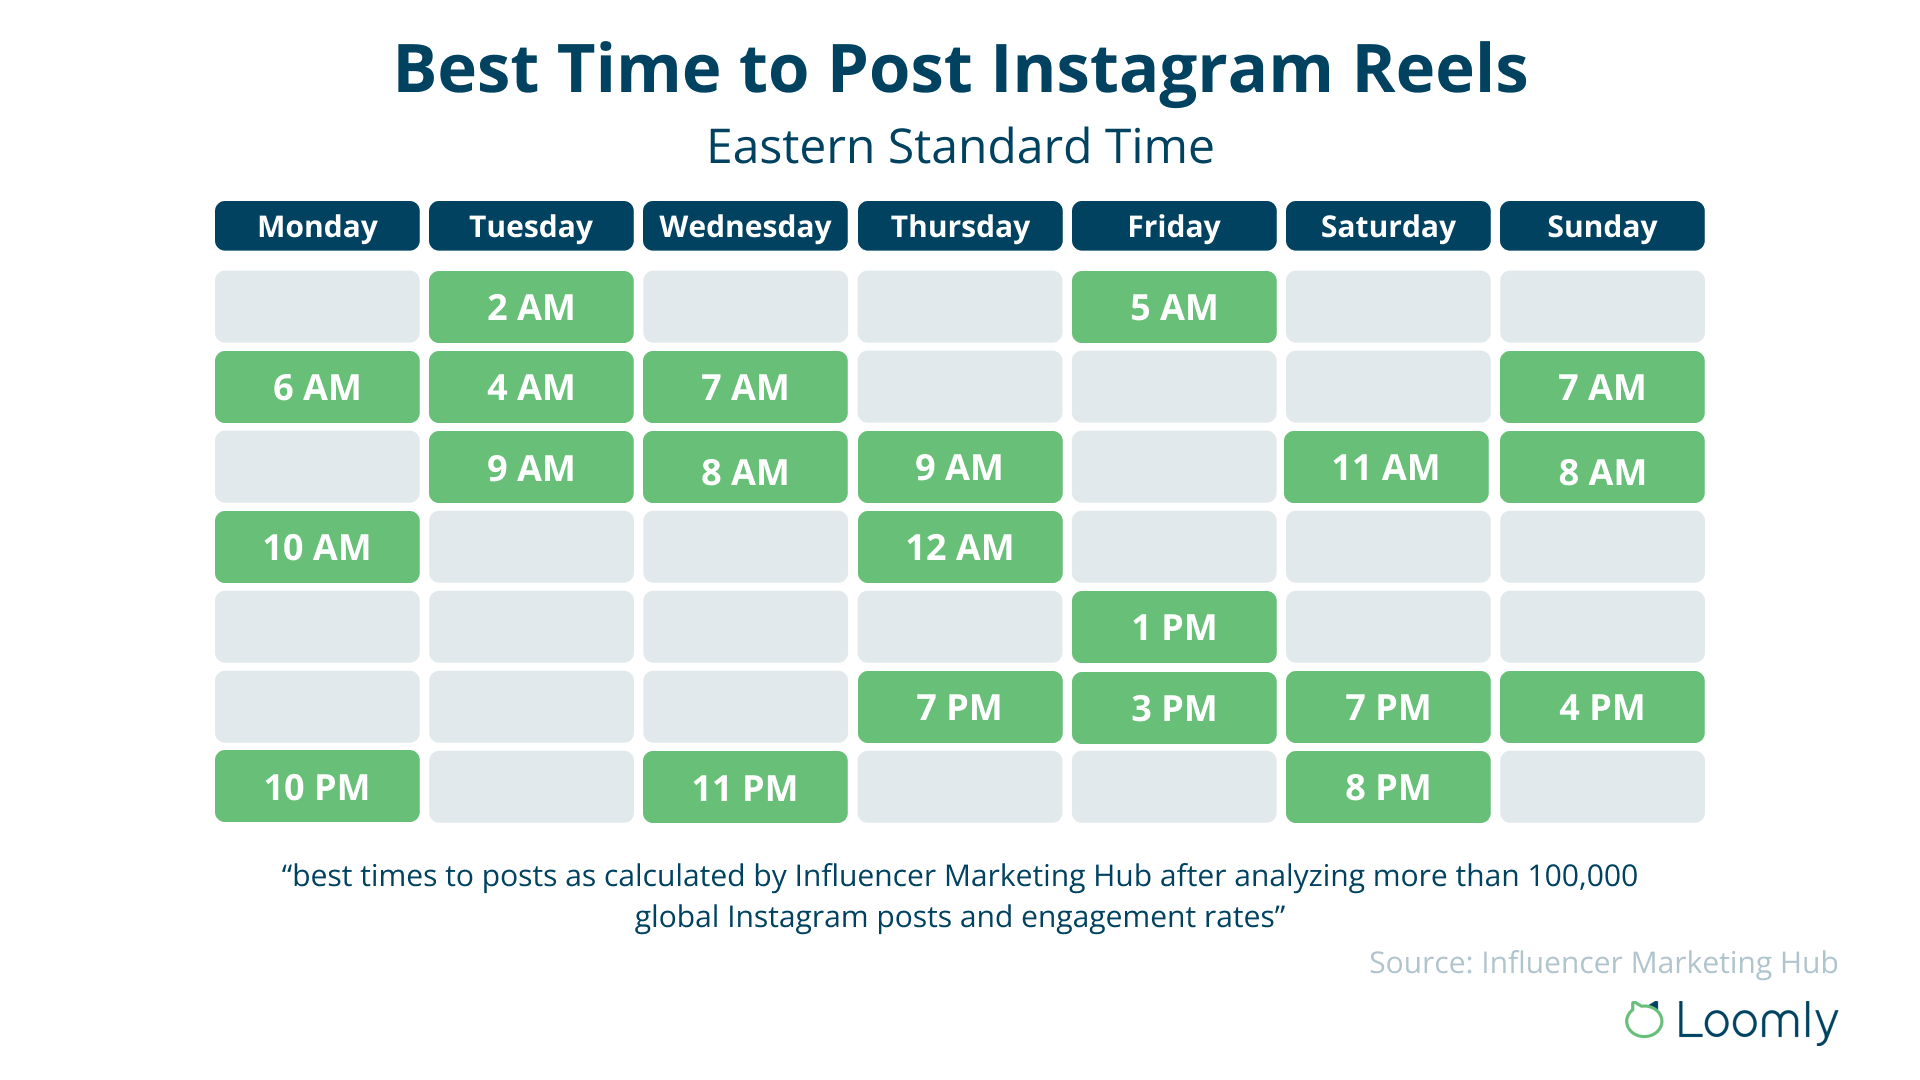 The best time of day to post an Instagram Reel varies throughout the week.